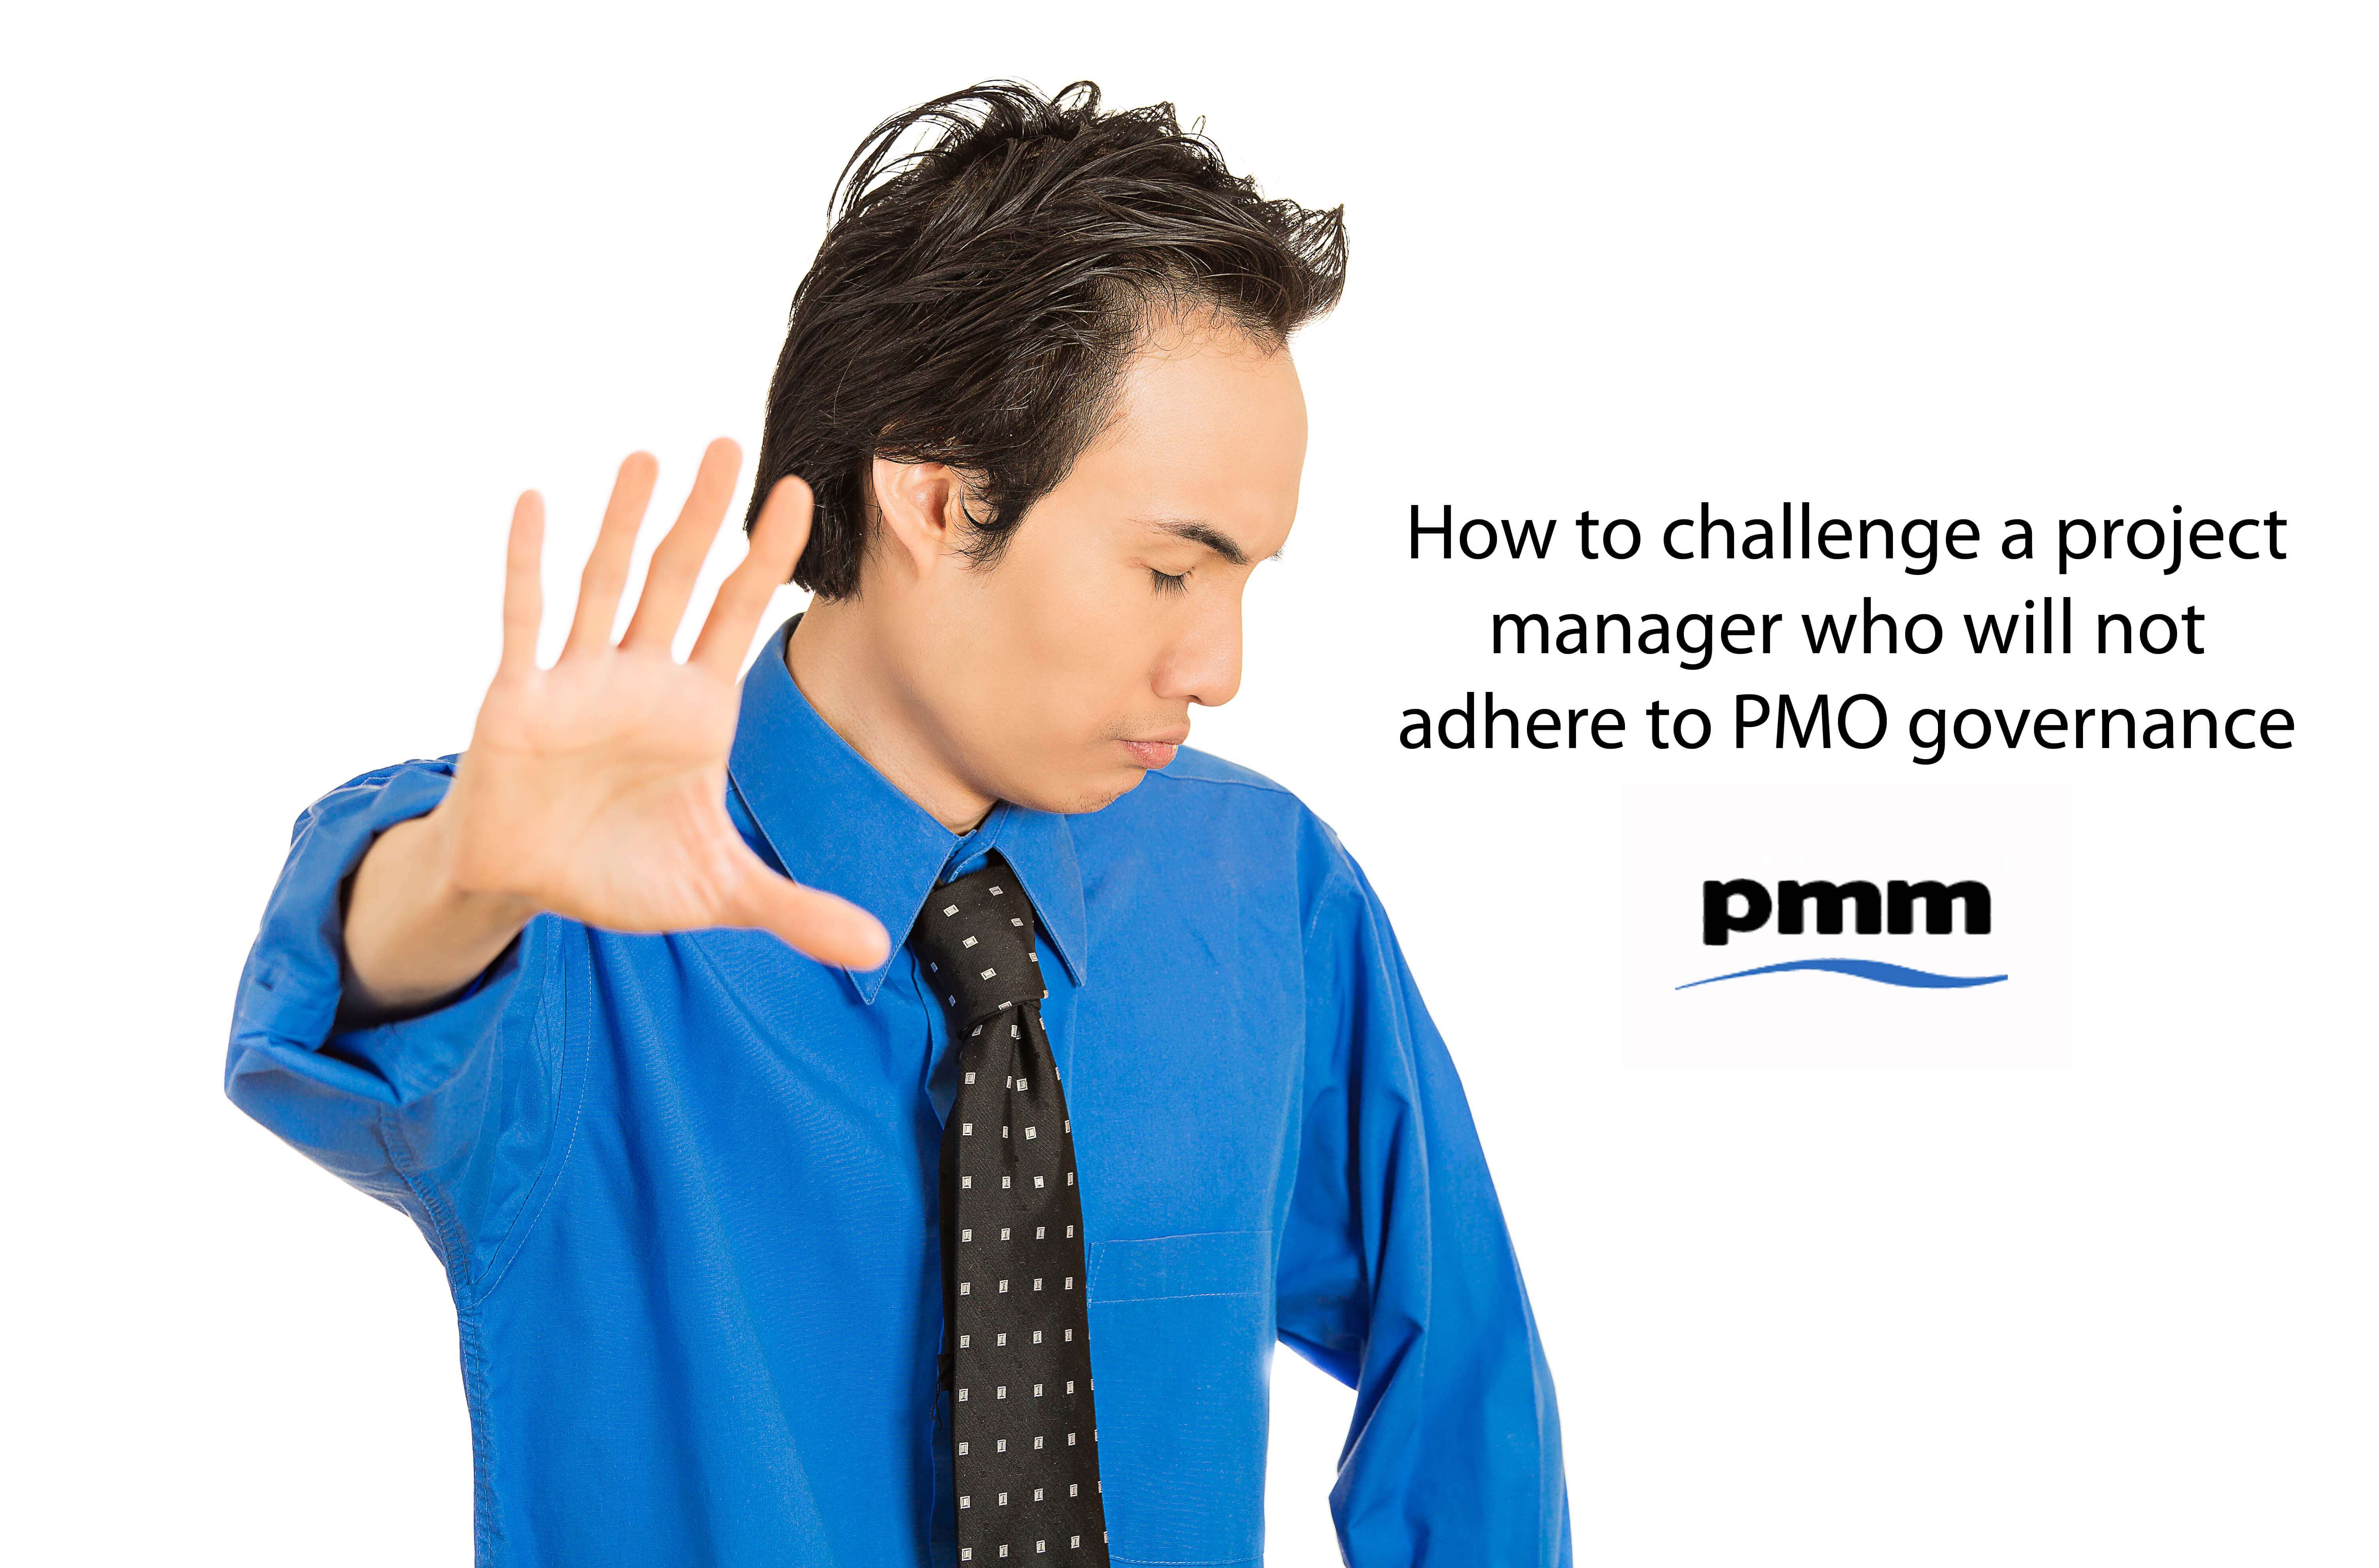 How to challenge a project manager who does not adhere to PMO governance